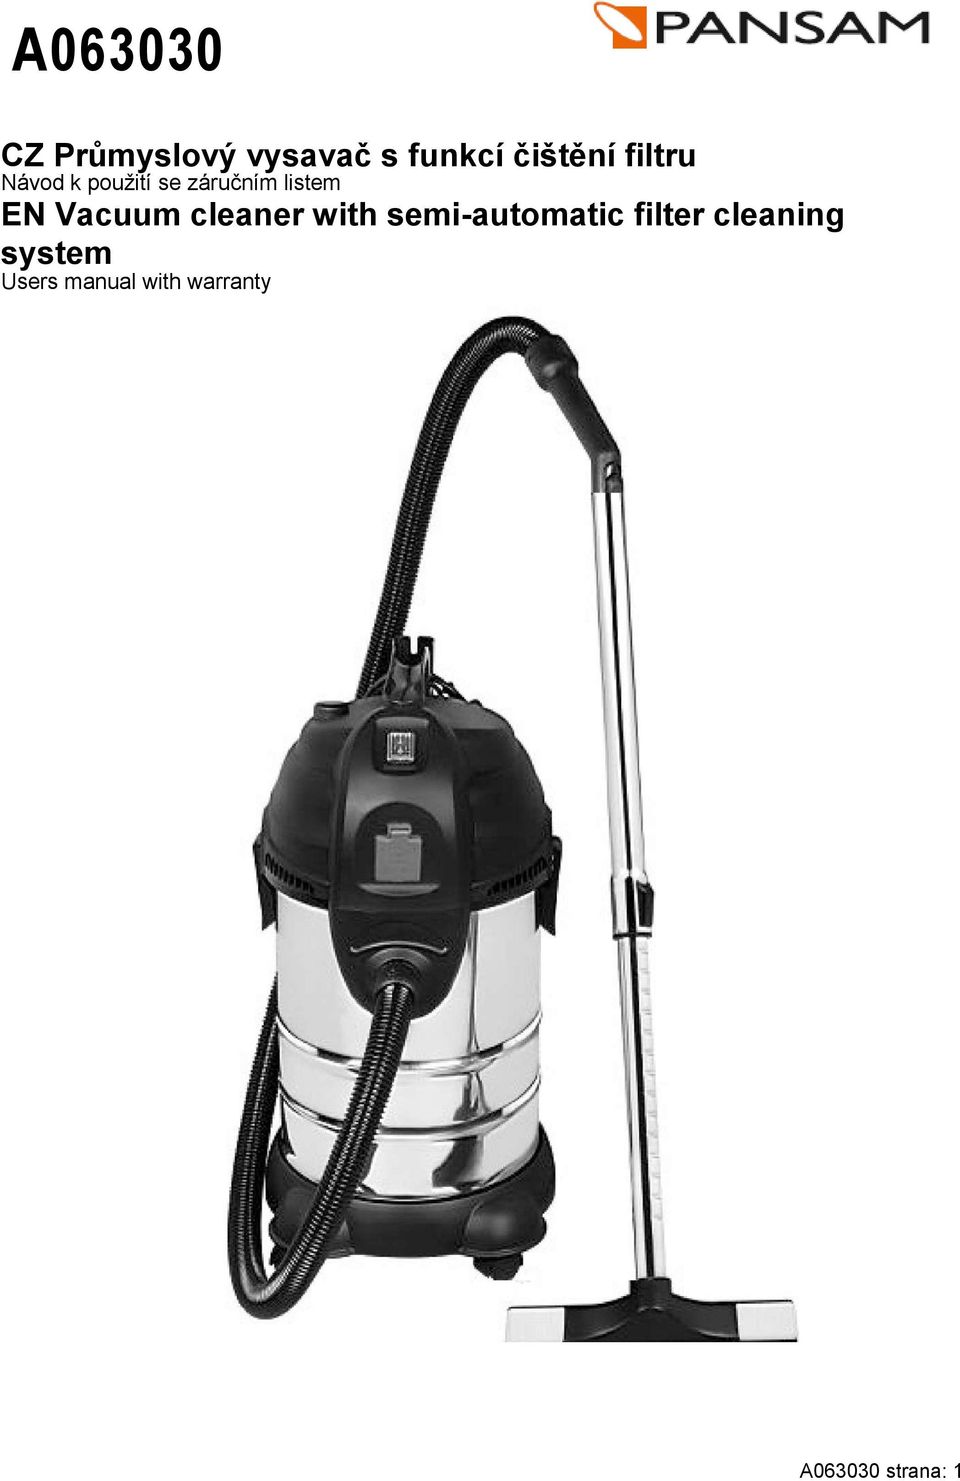 Vacuum cleaner with semi-automatic filter